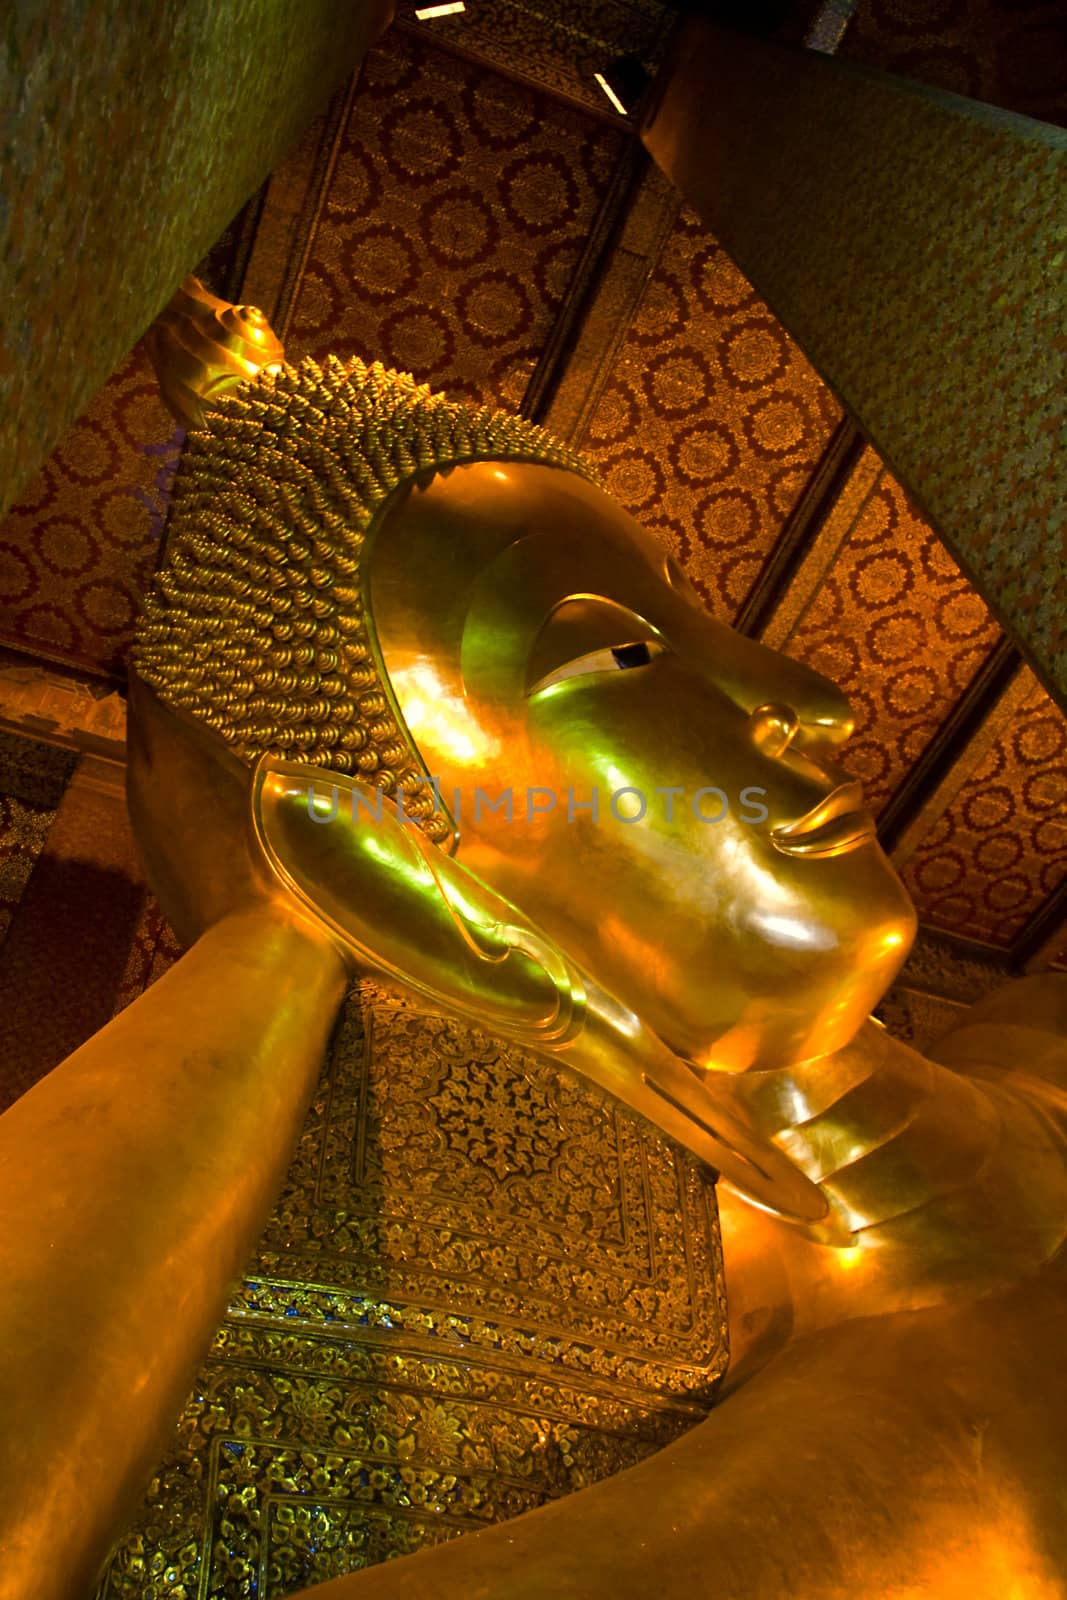 Reclining buddha within the Wat Pho in Bangkok Thailand by foryouinf